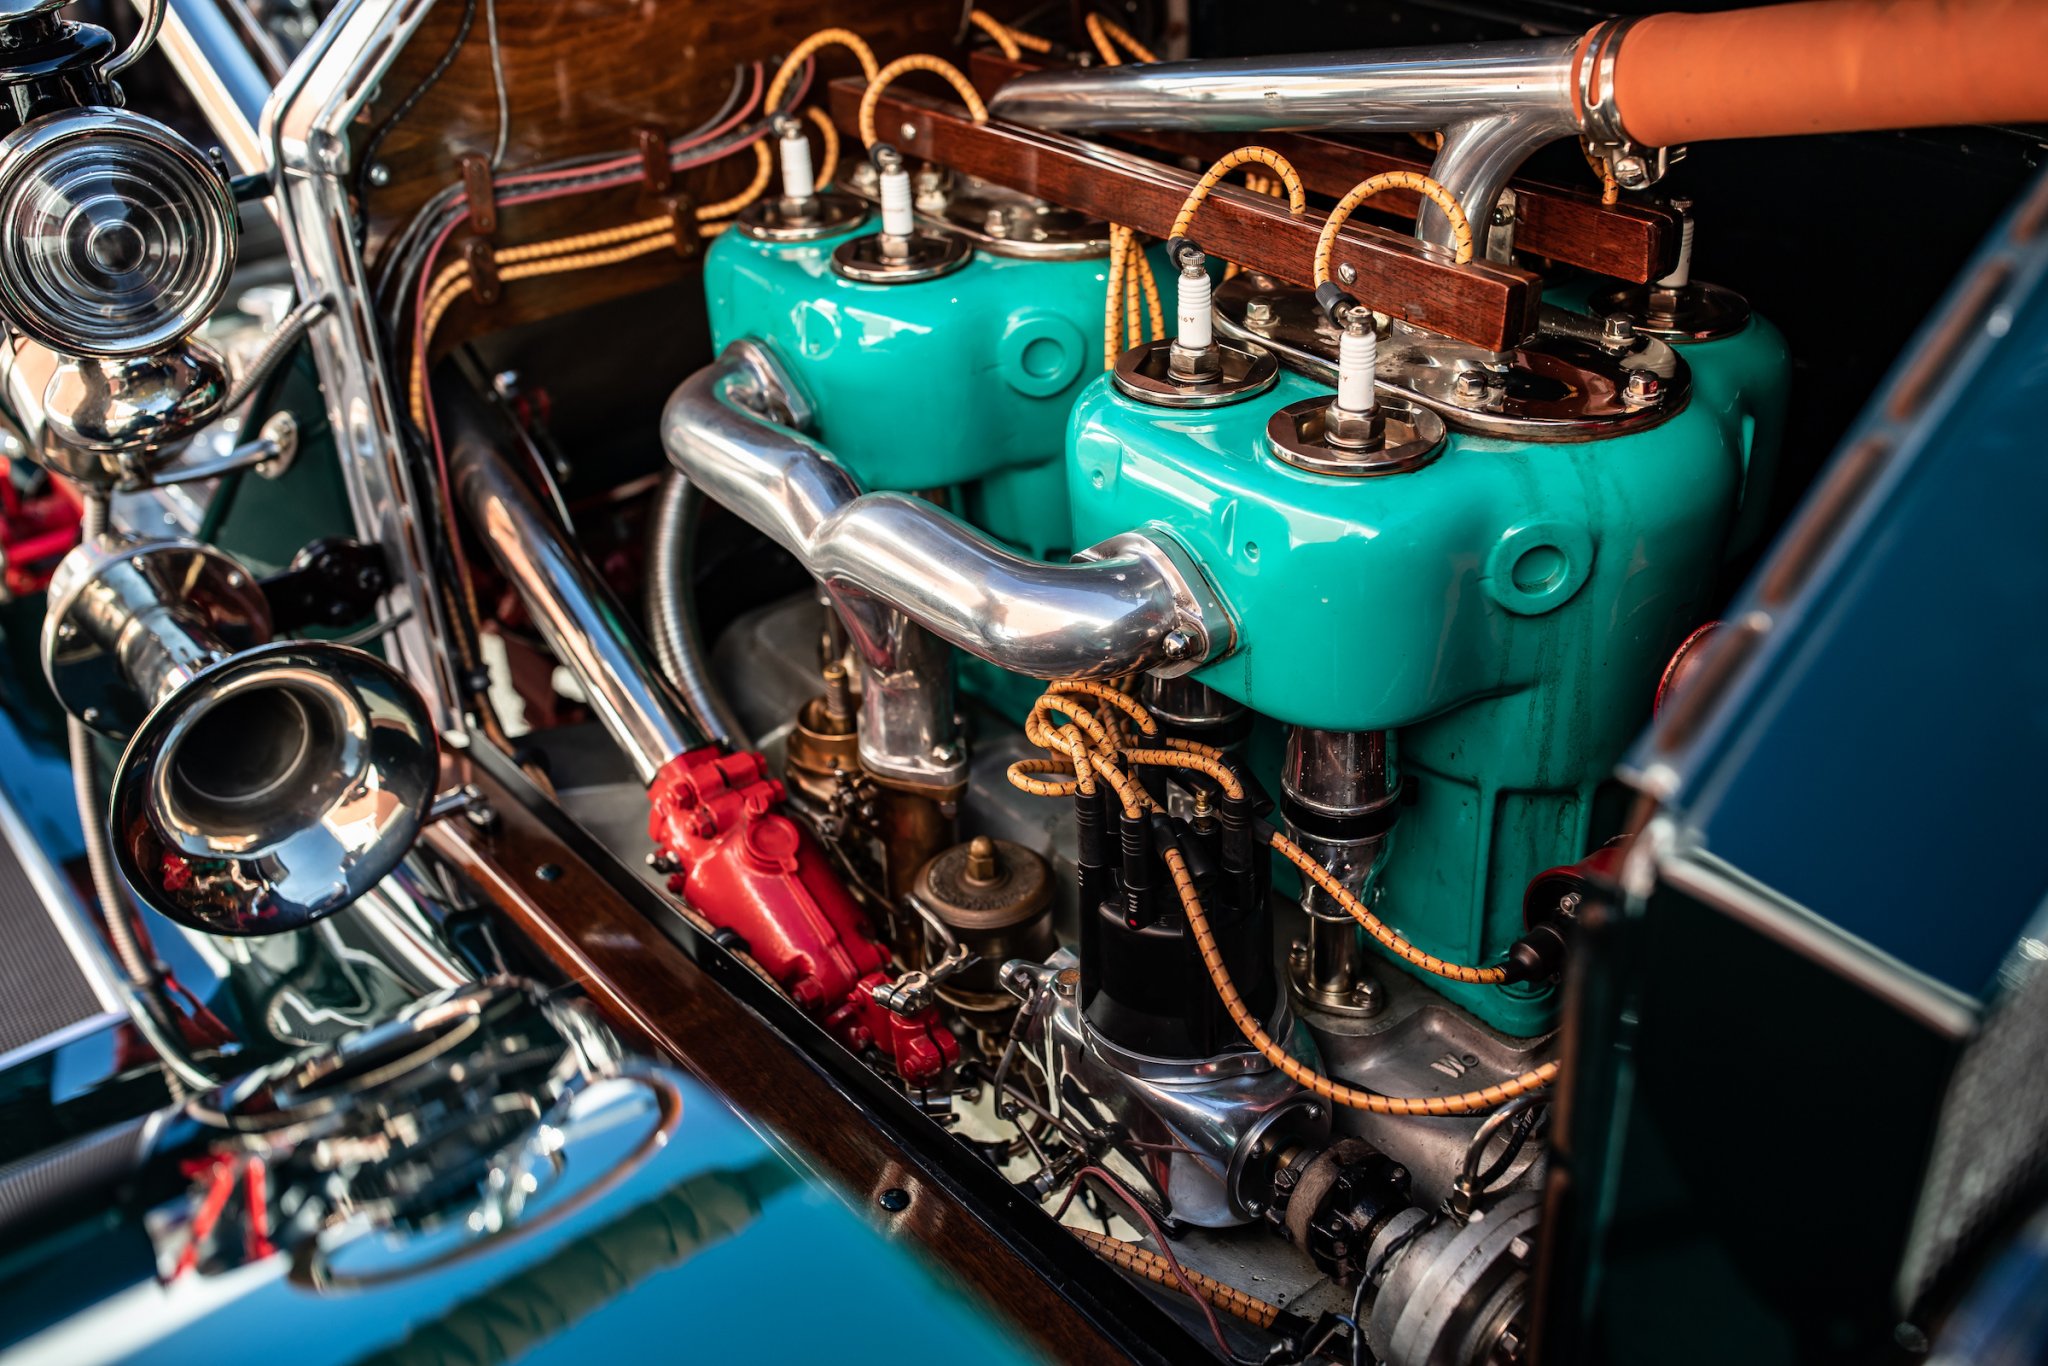 Stutz-Bearcat-390 cubic inch four-cylinder engine with four-valves per cylinder-60 bhp.jpg